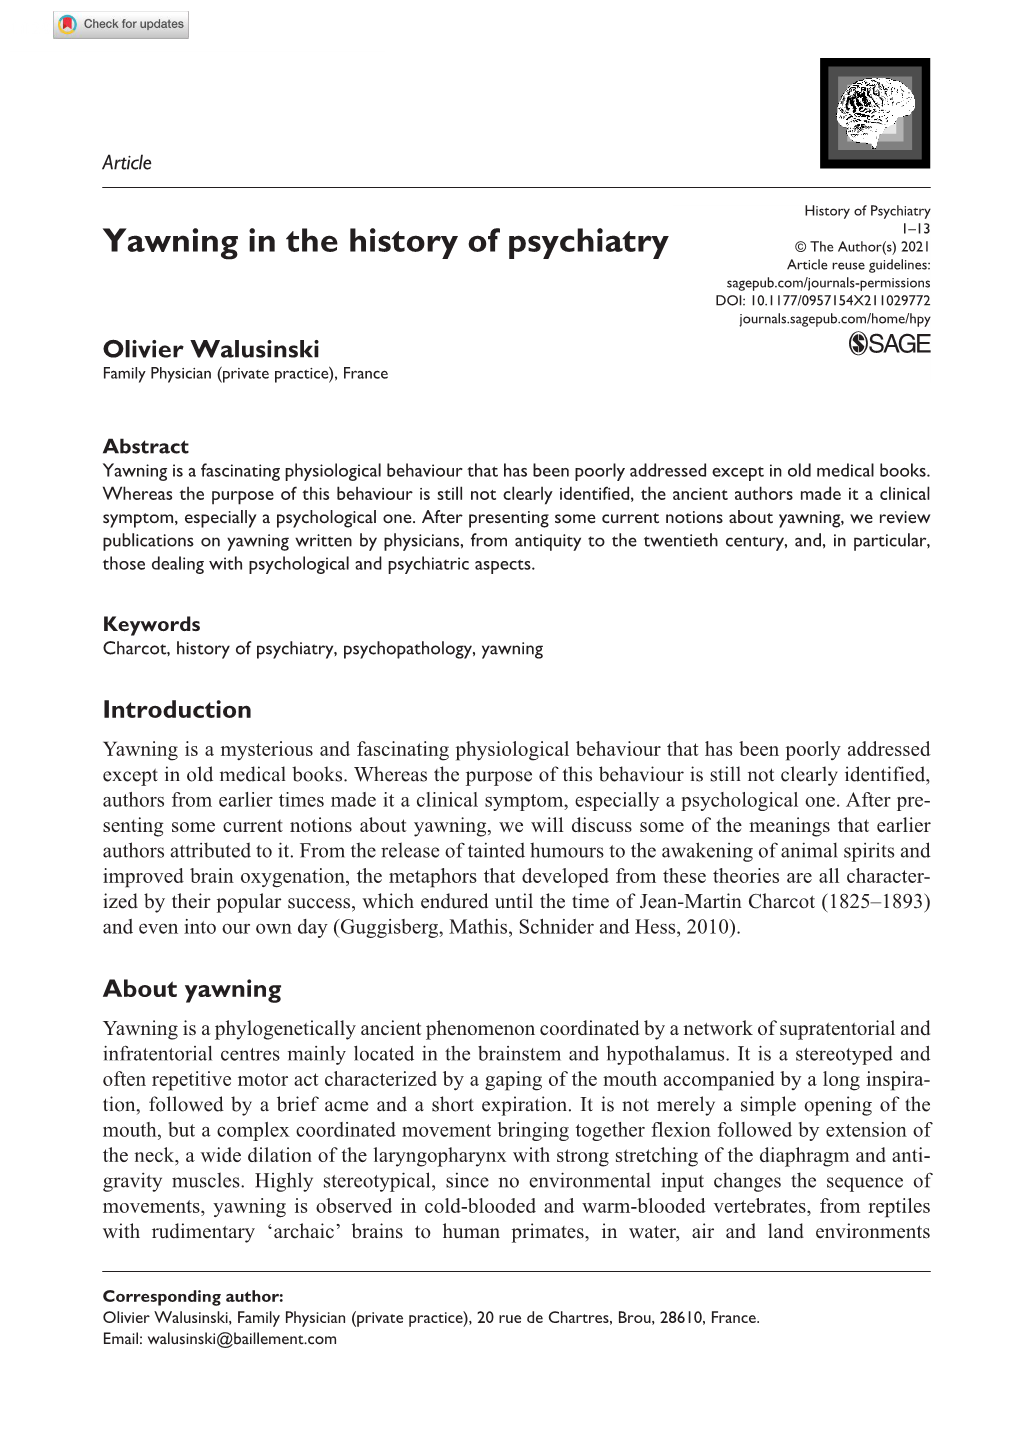 Yawning in the History of Psychiatry